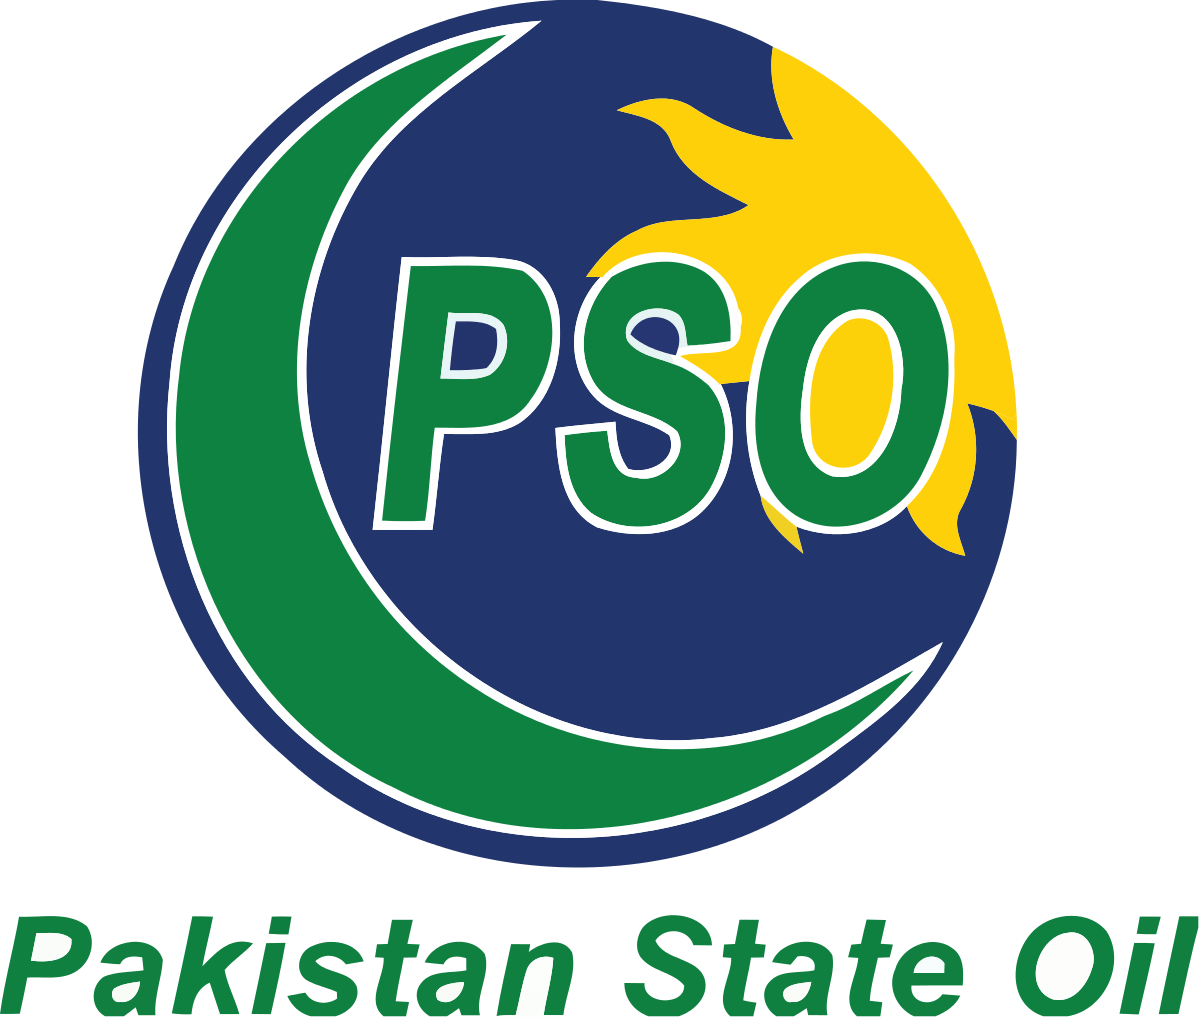 PSO reports profit after tax of Rs. 4.2 billion in 1H FY19